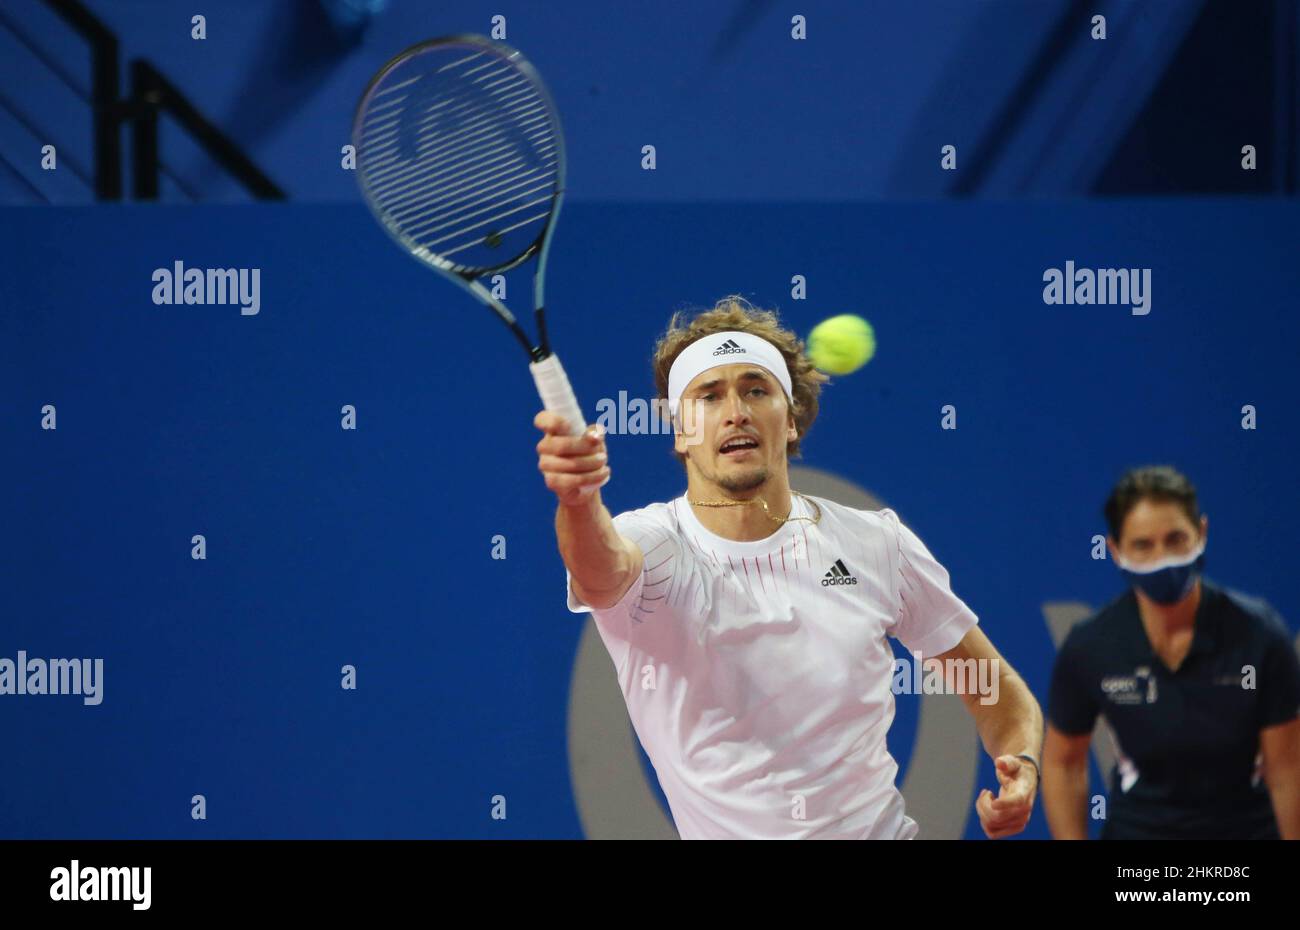 Alexander Zverev of Germany during his match against Mikael Ymer of Sweden during the semi-finals at the Open Sud de France 2022, ATP 250 tennis tournament on February 5, 2022 at Sud